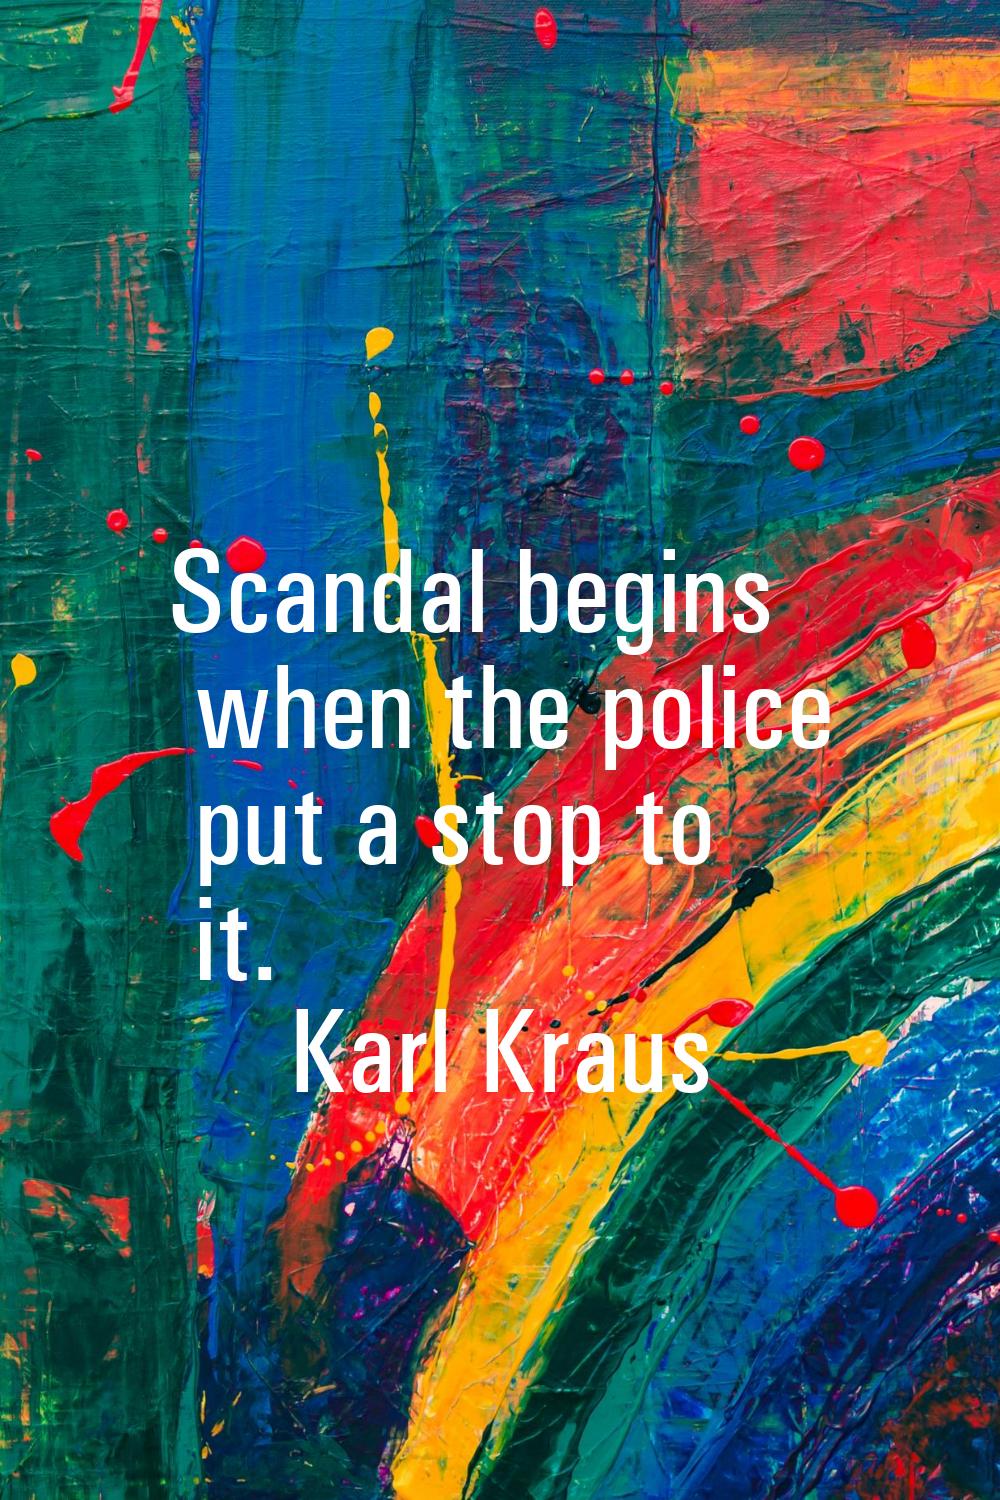 Scandal begins when the police put a stop to it.